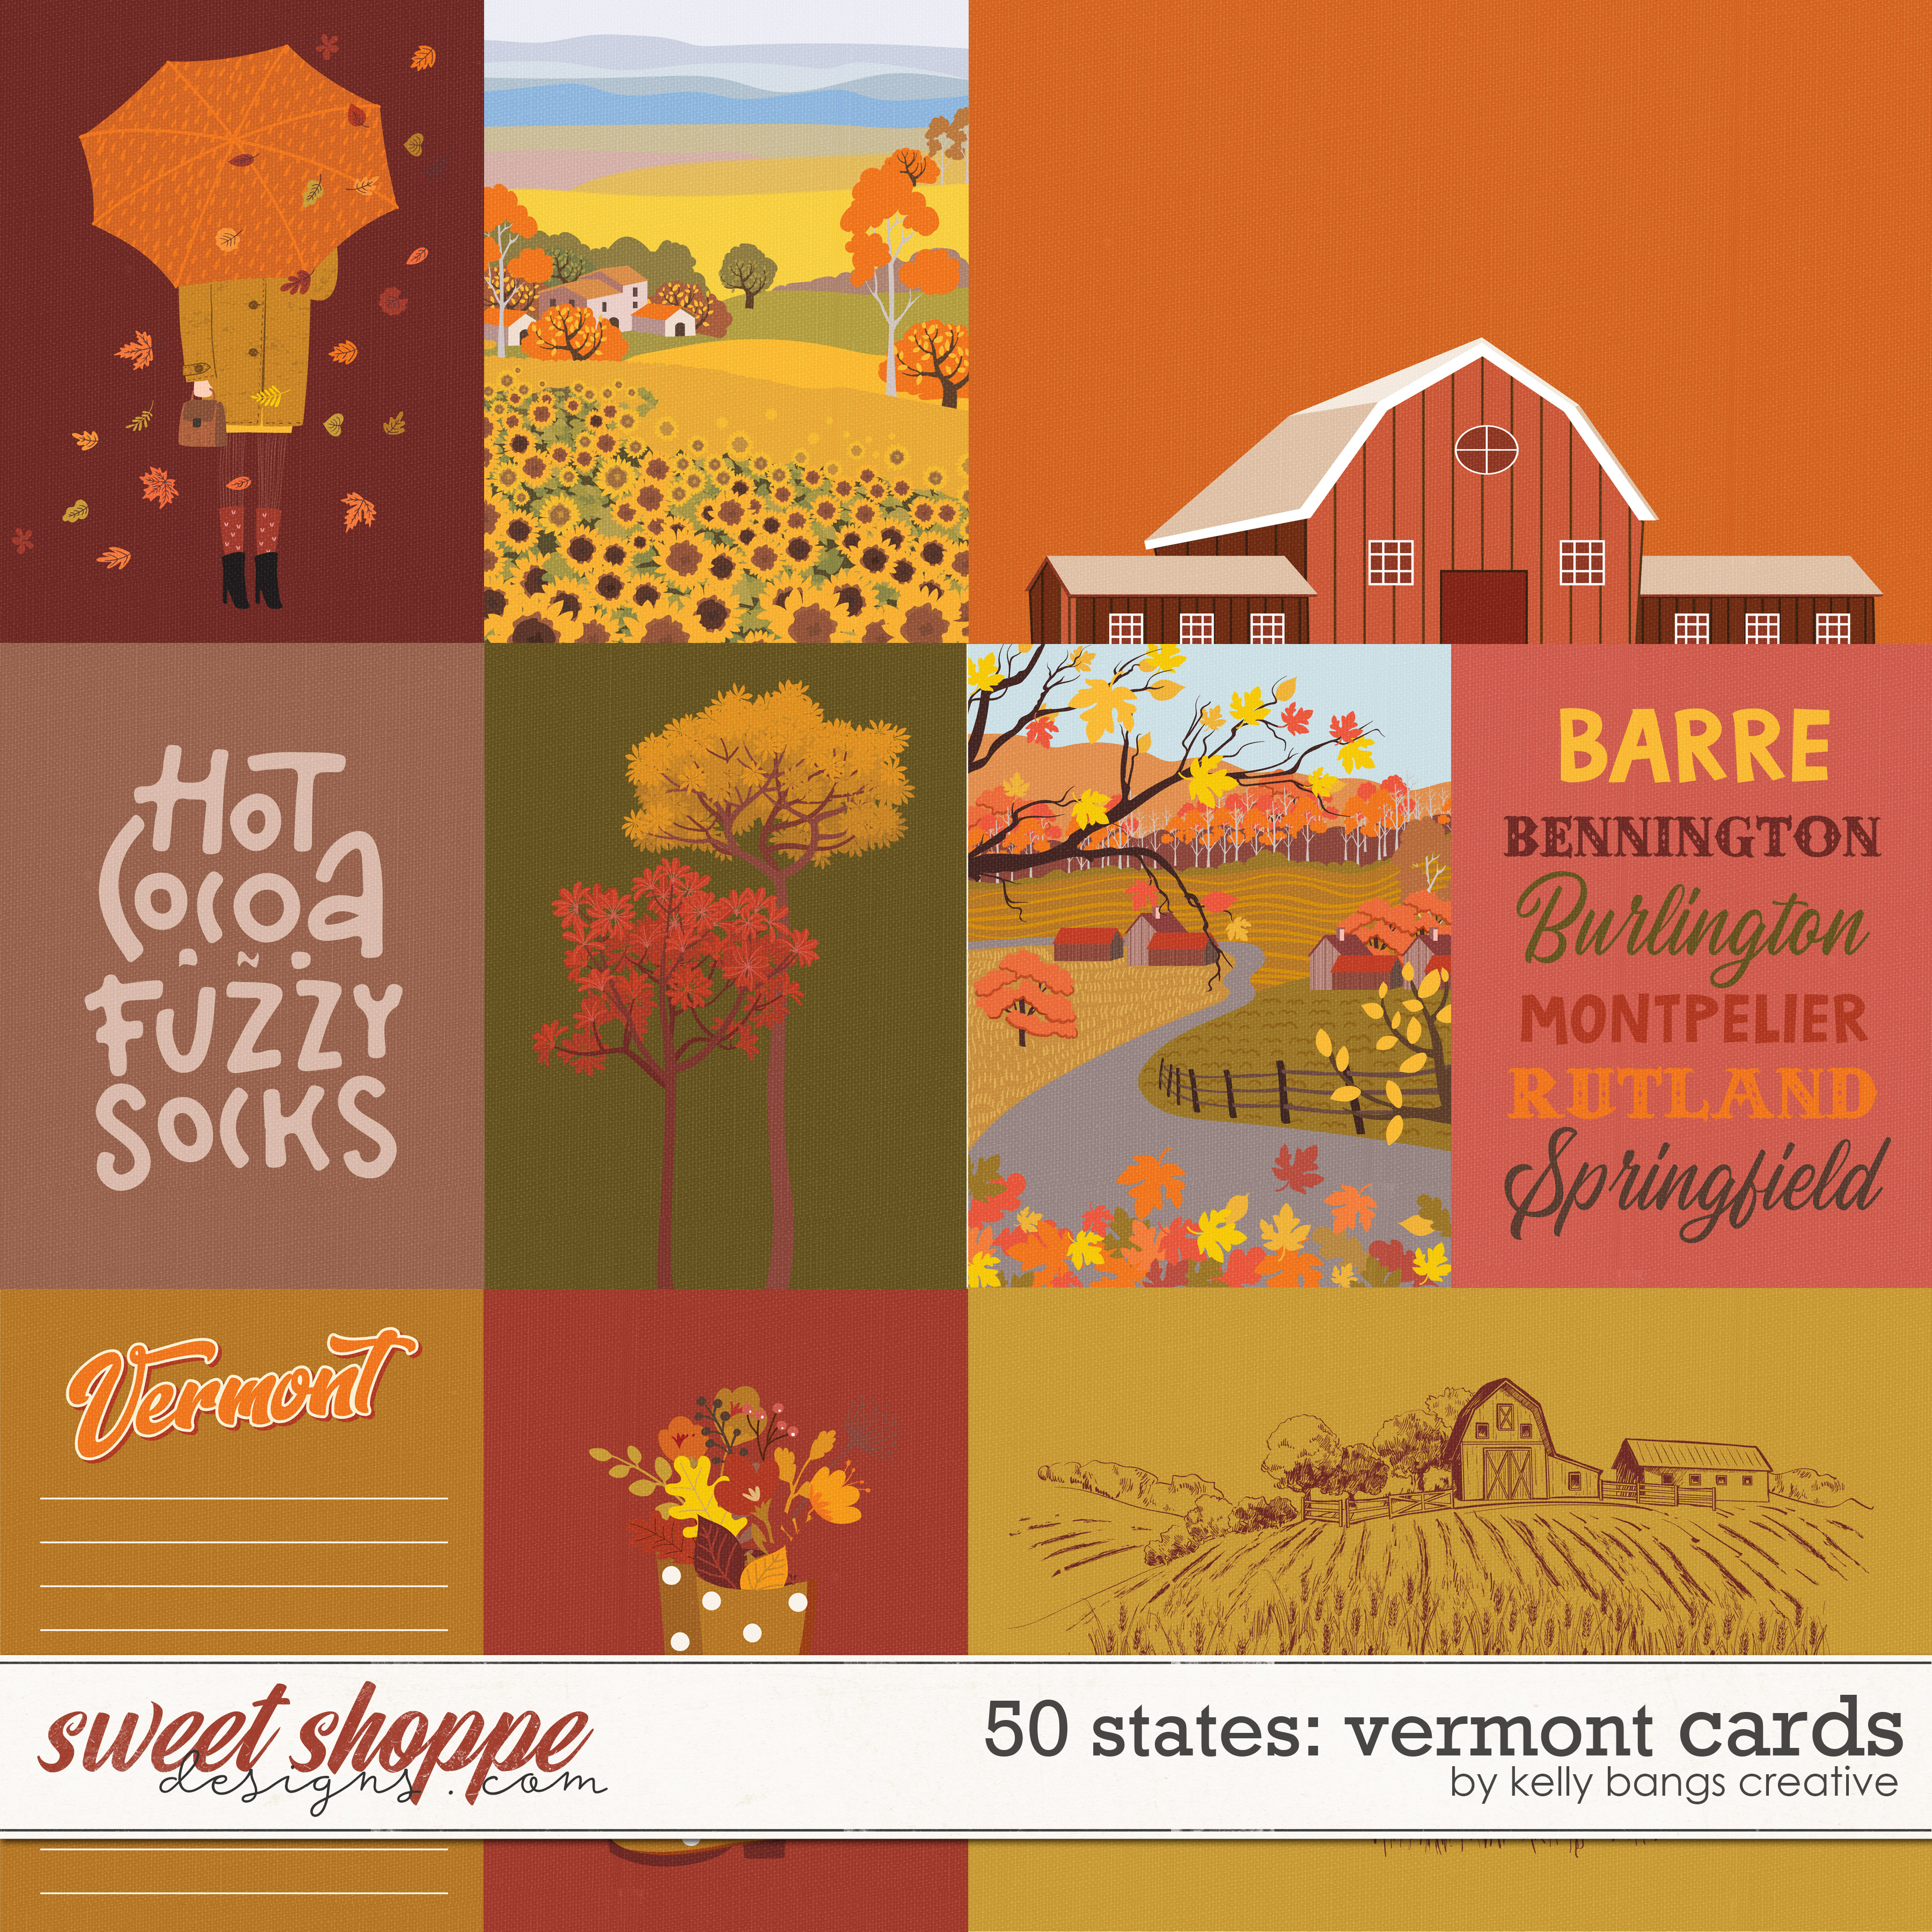 50 States:Vermont Cards by Kelly Bangs Creative